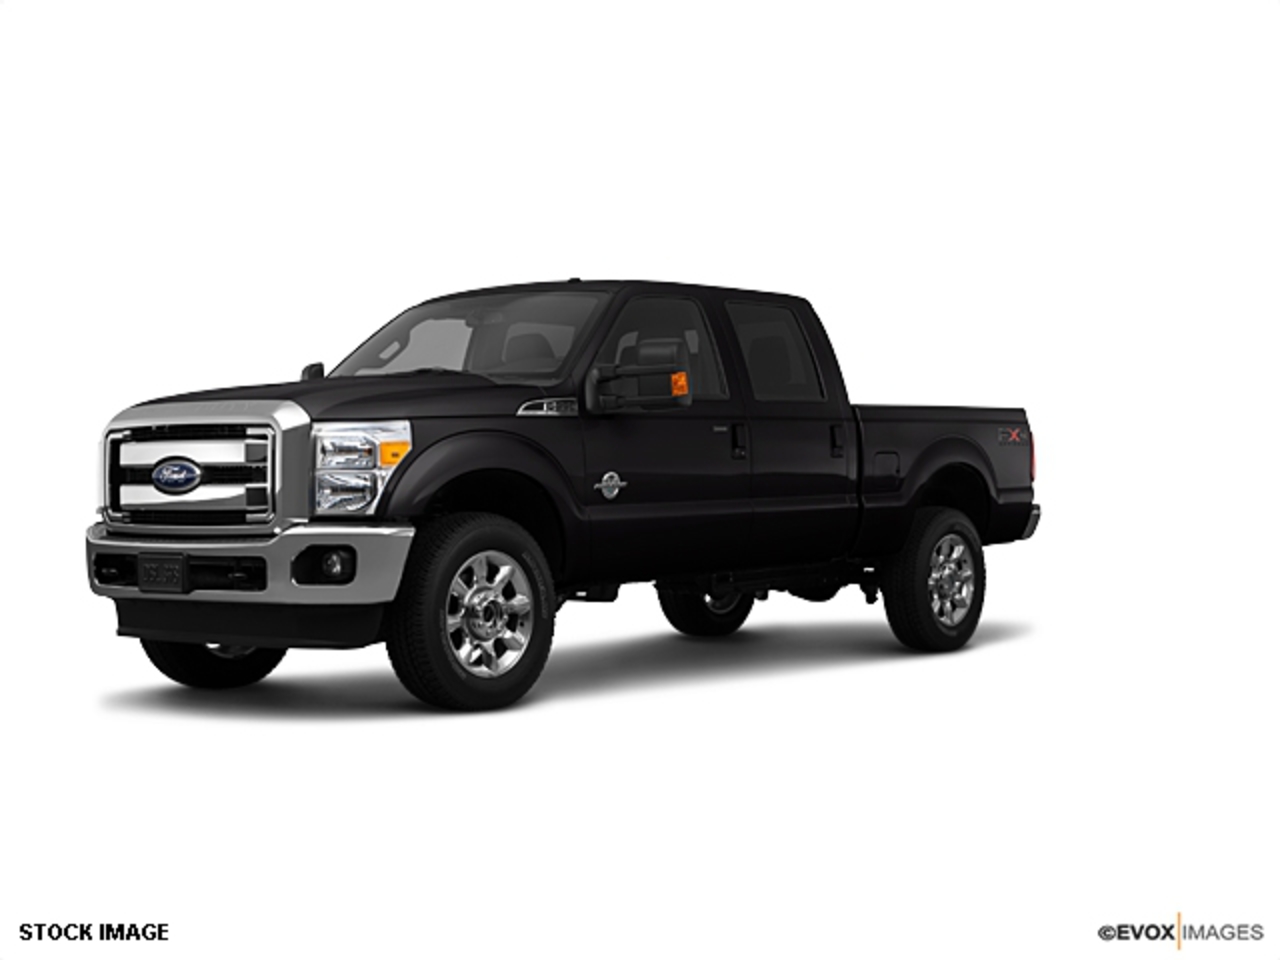 Ford F-350 XLT Type I. View Download Wallpaper. 640x480. Comments